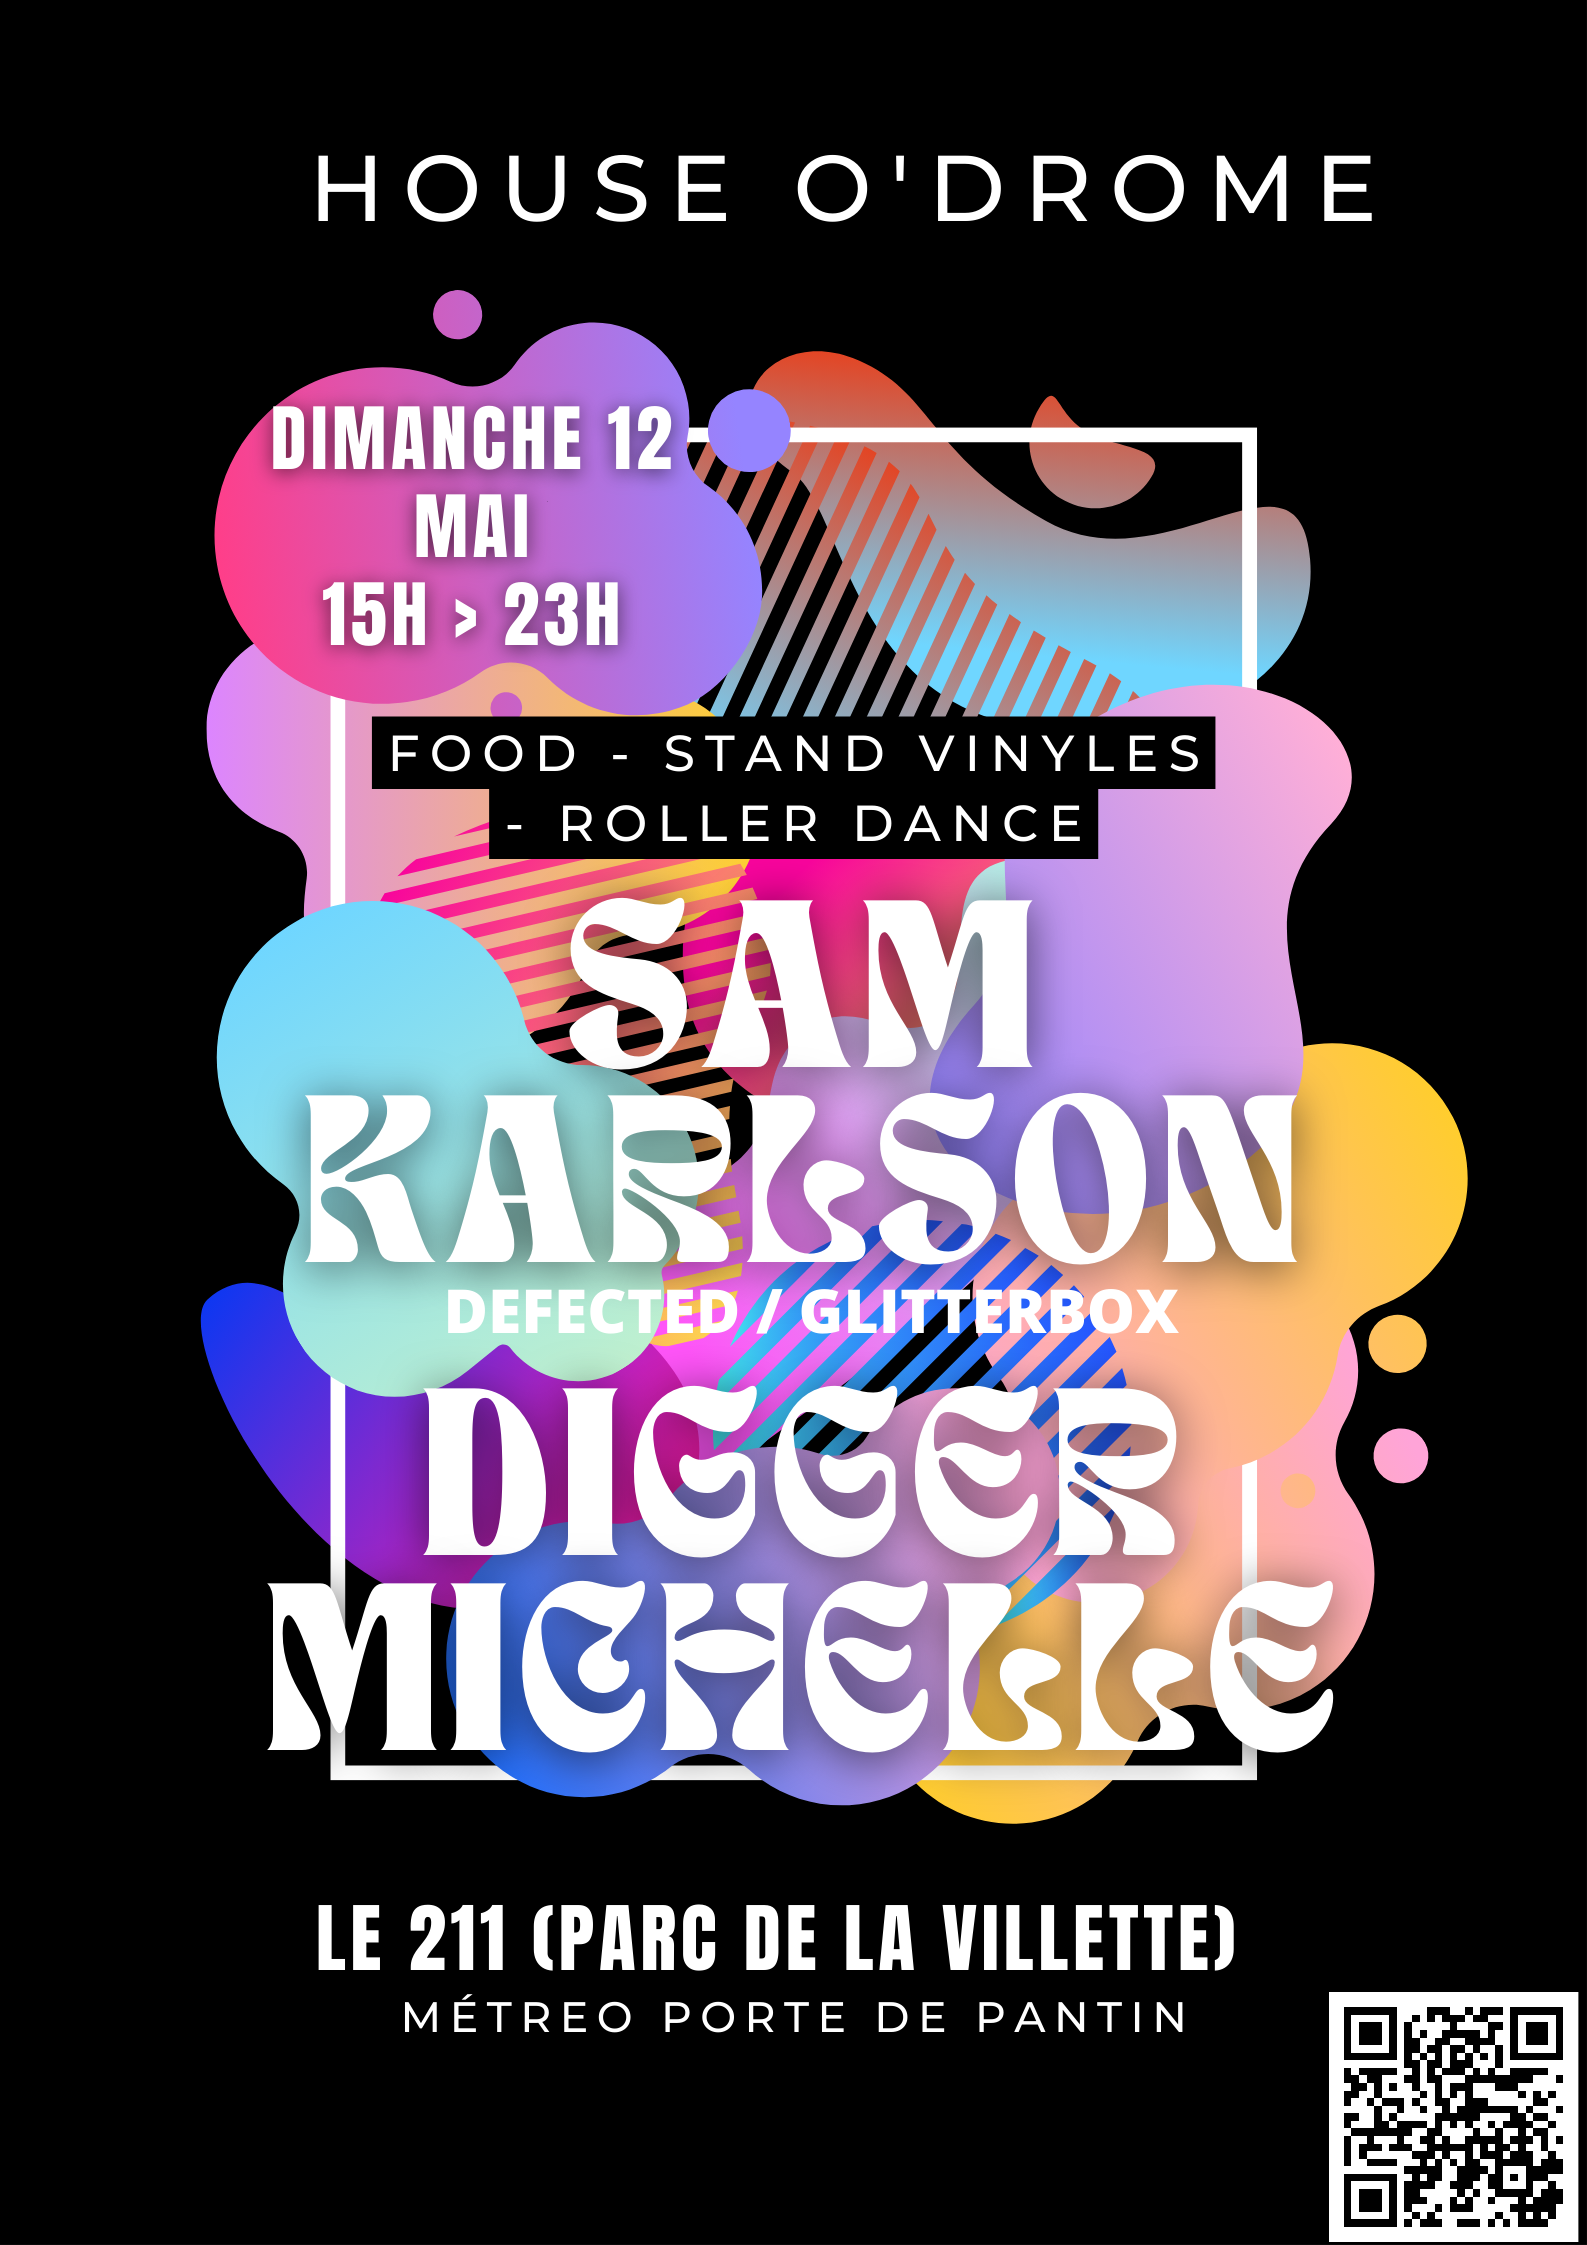 House O'Drome: SAM KARLSON (DEFECTED/GLITTERBOX), DIGGER MICHELLE & MORE - フライヤー表